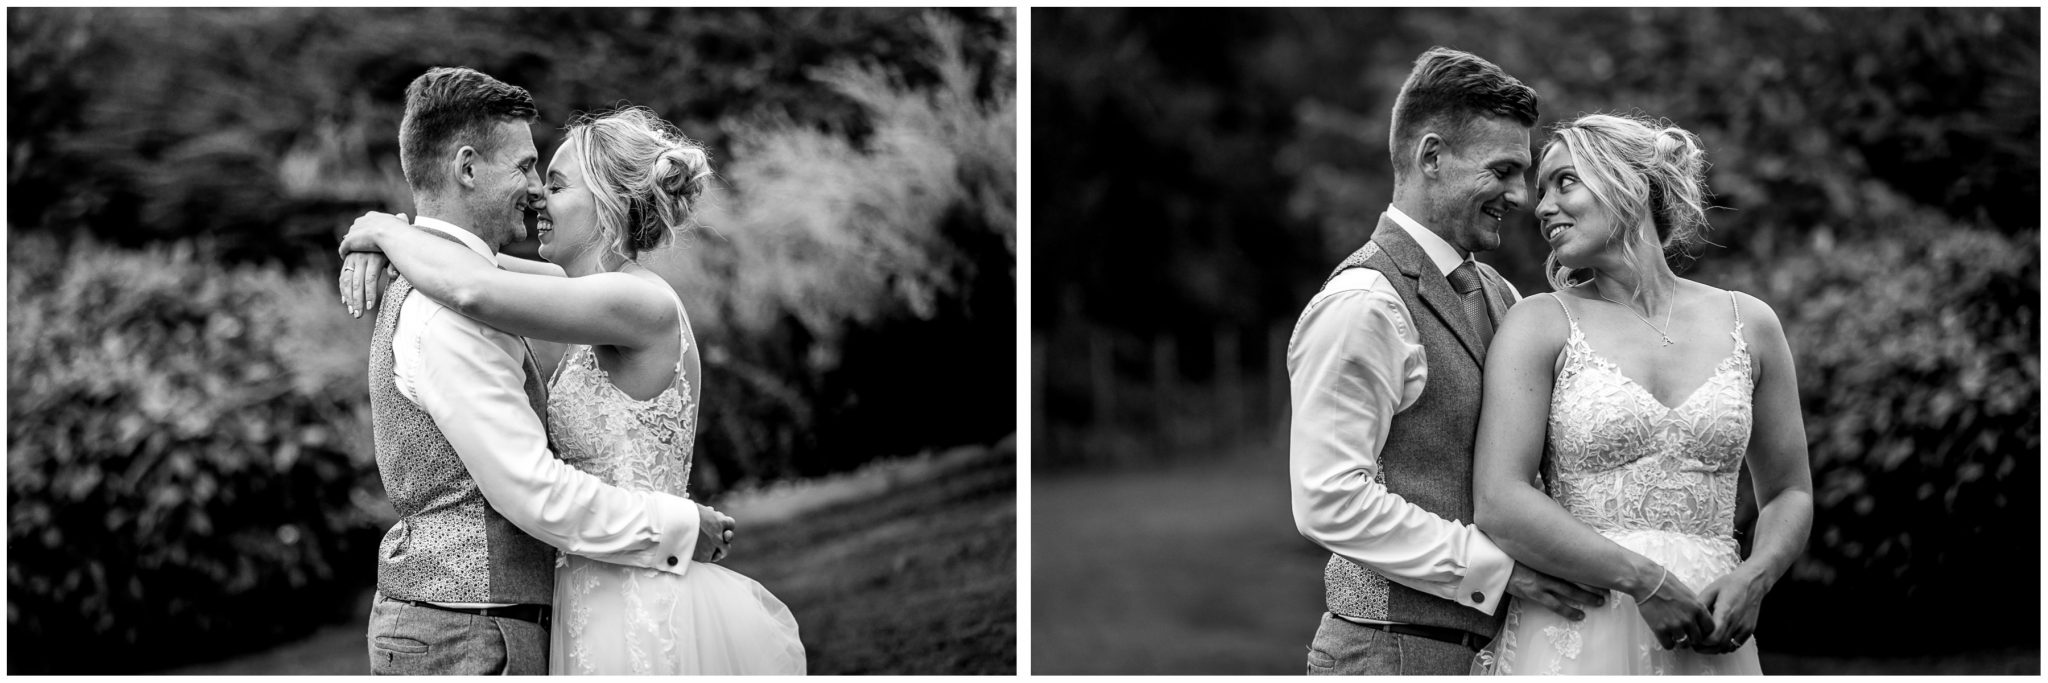 Black and white couple portraits in the evening light